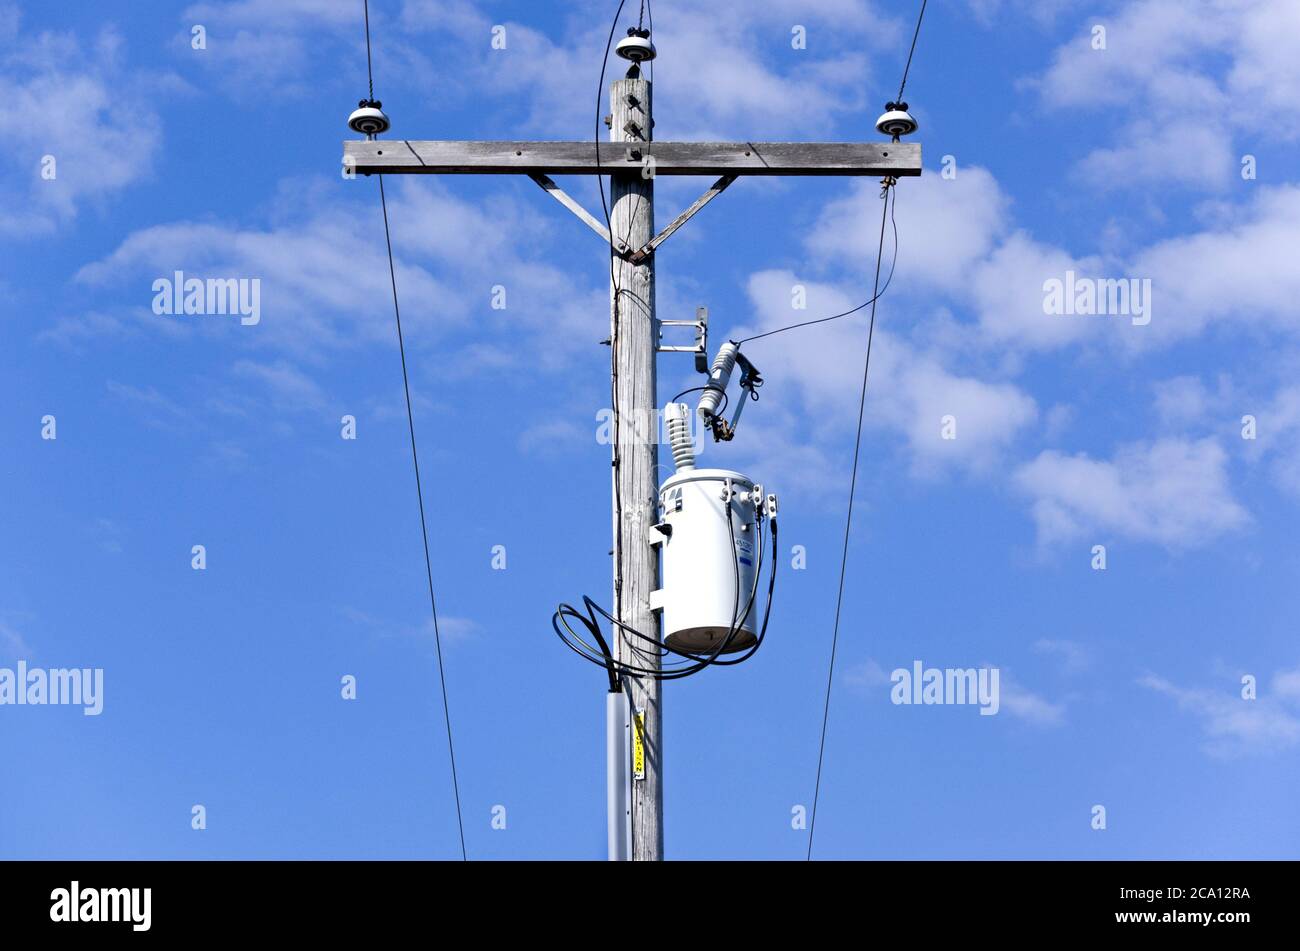 Overhead power line connection through fuse and transformer to residential underground power line. Stock Photo